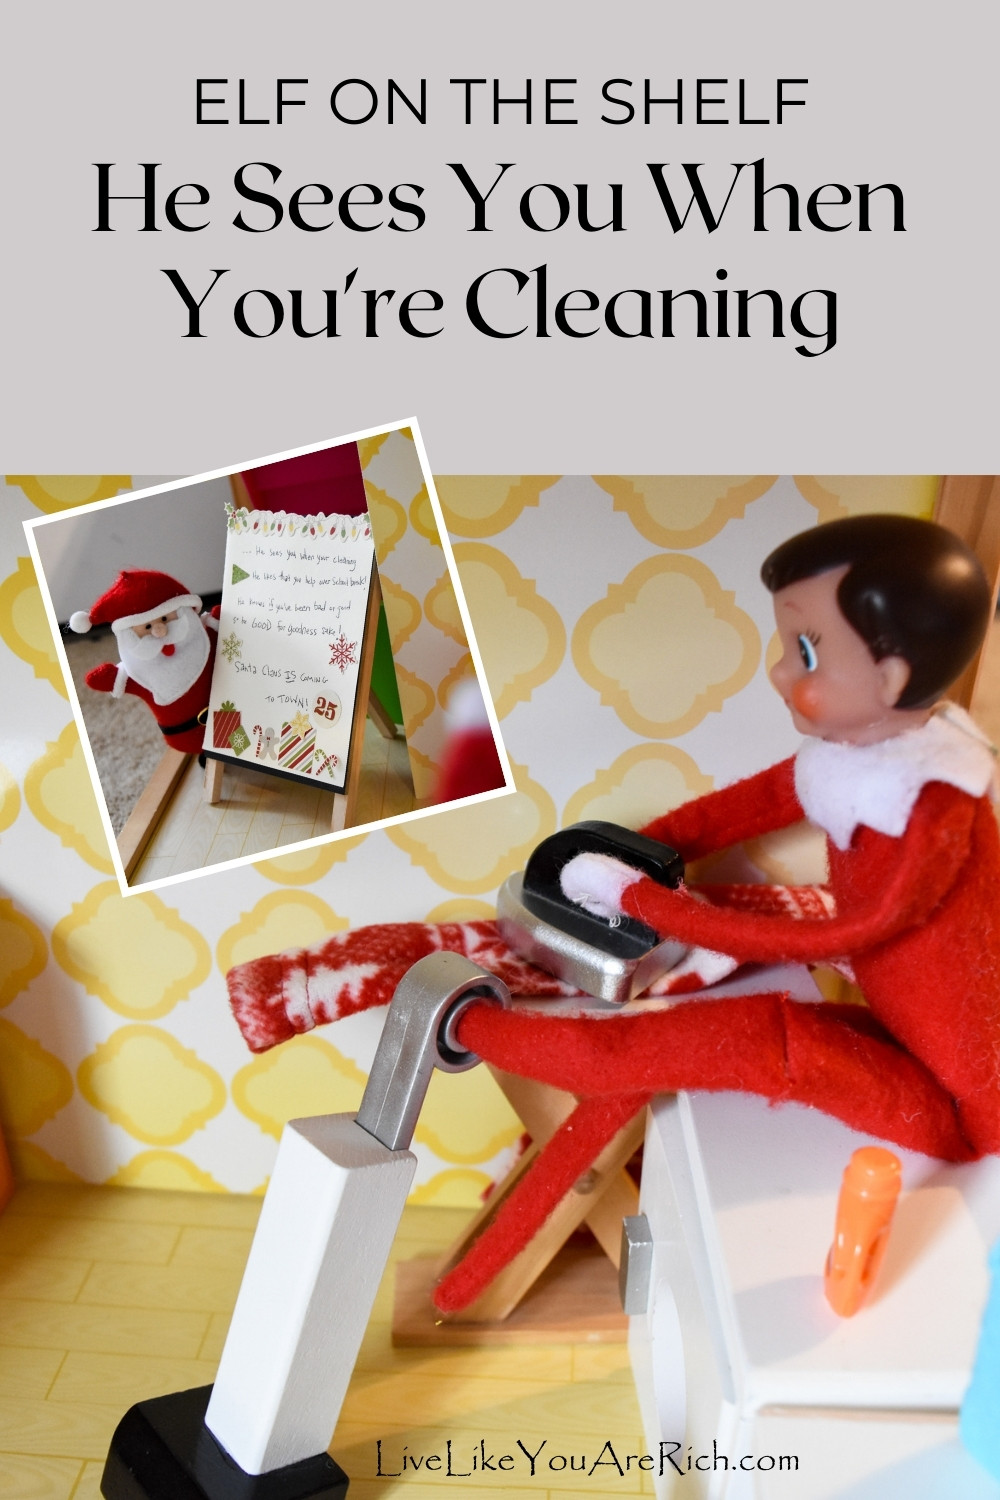 Elf on the Shelf: He Sees You When You're Cleaning